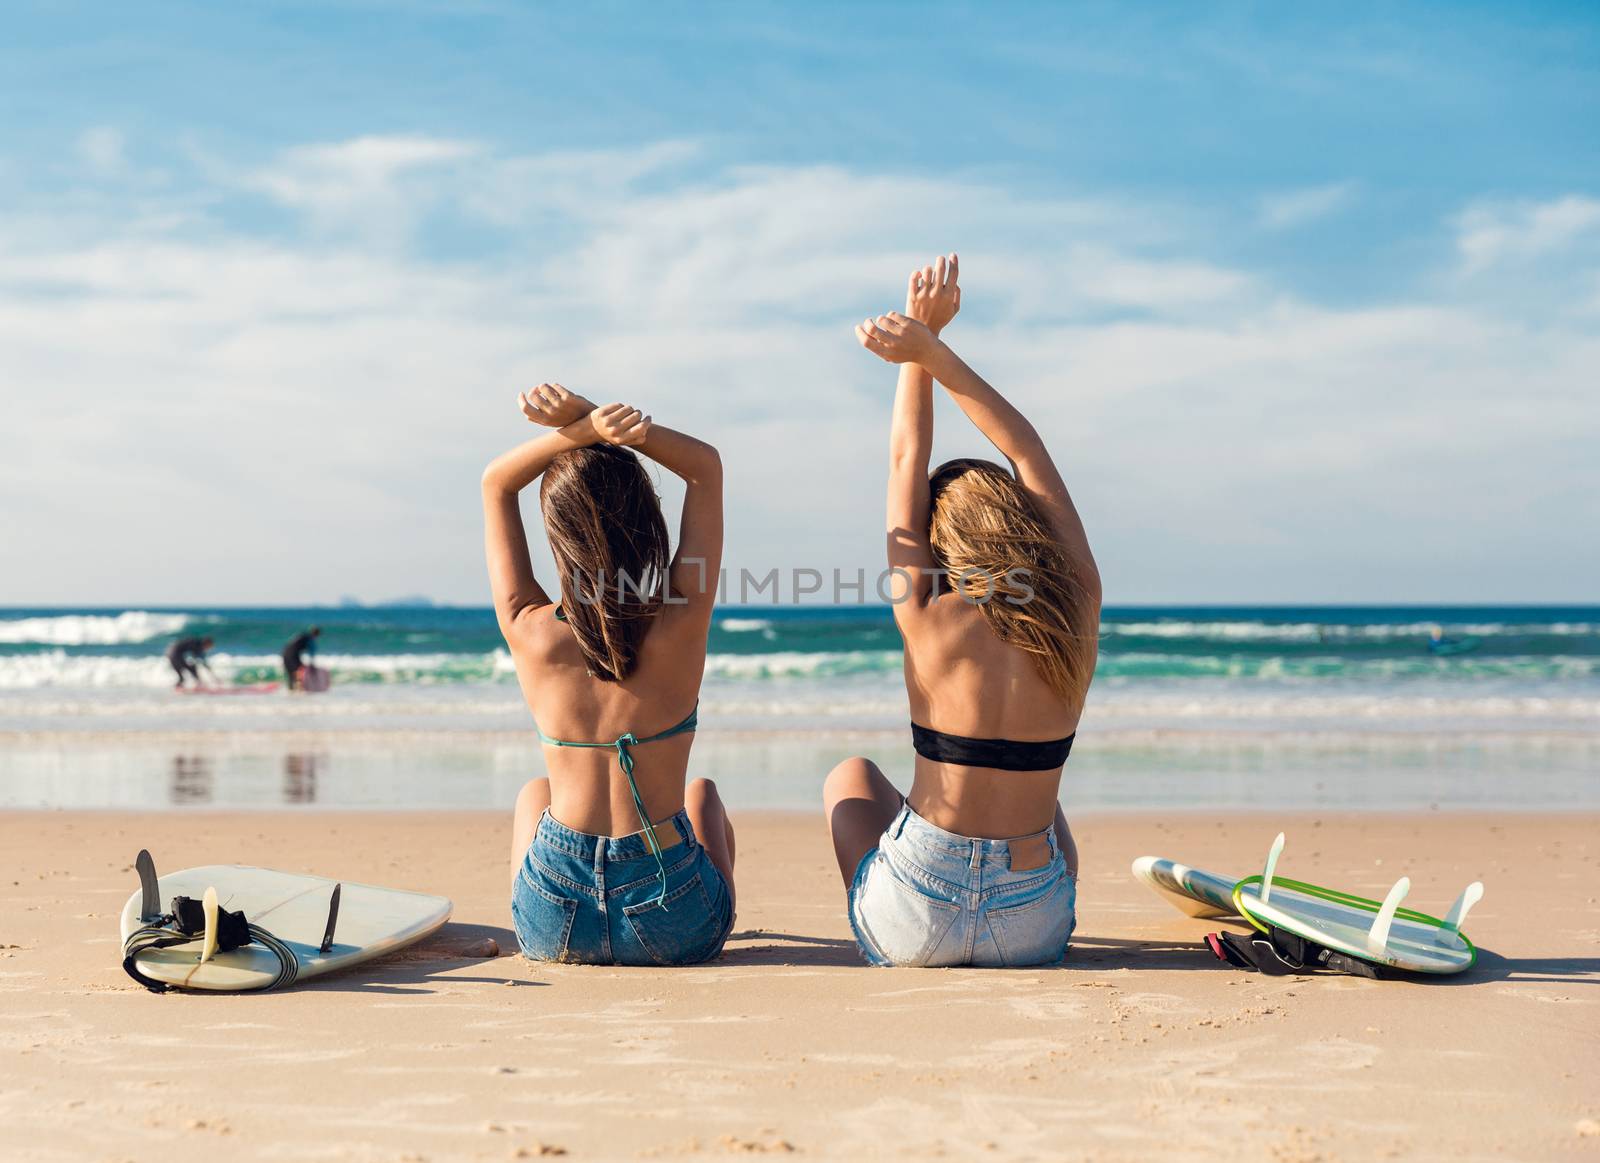 Two surfer girls at the beach by Iko